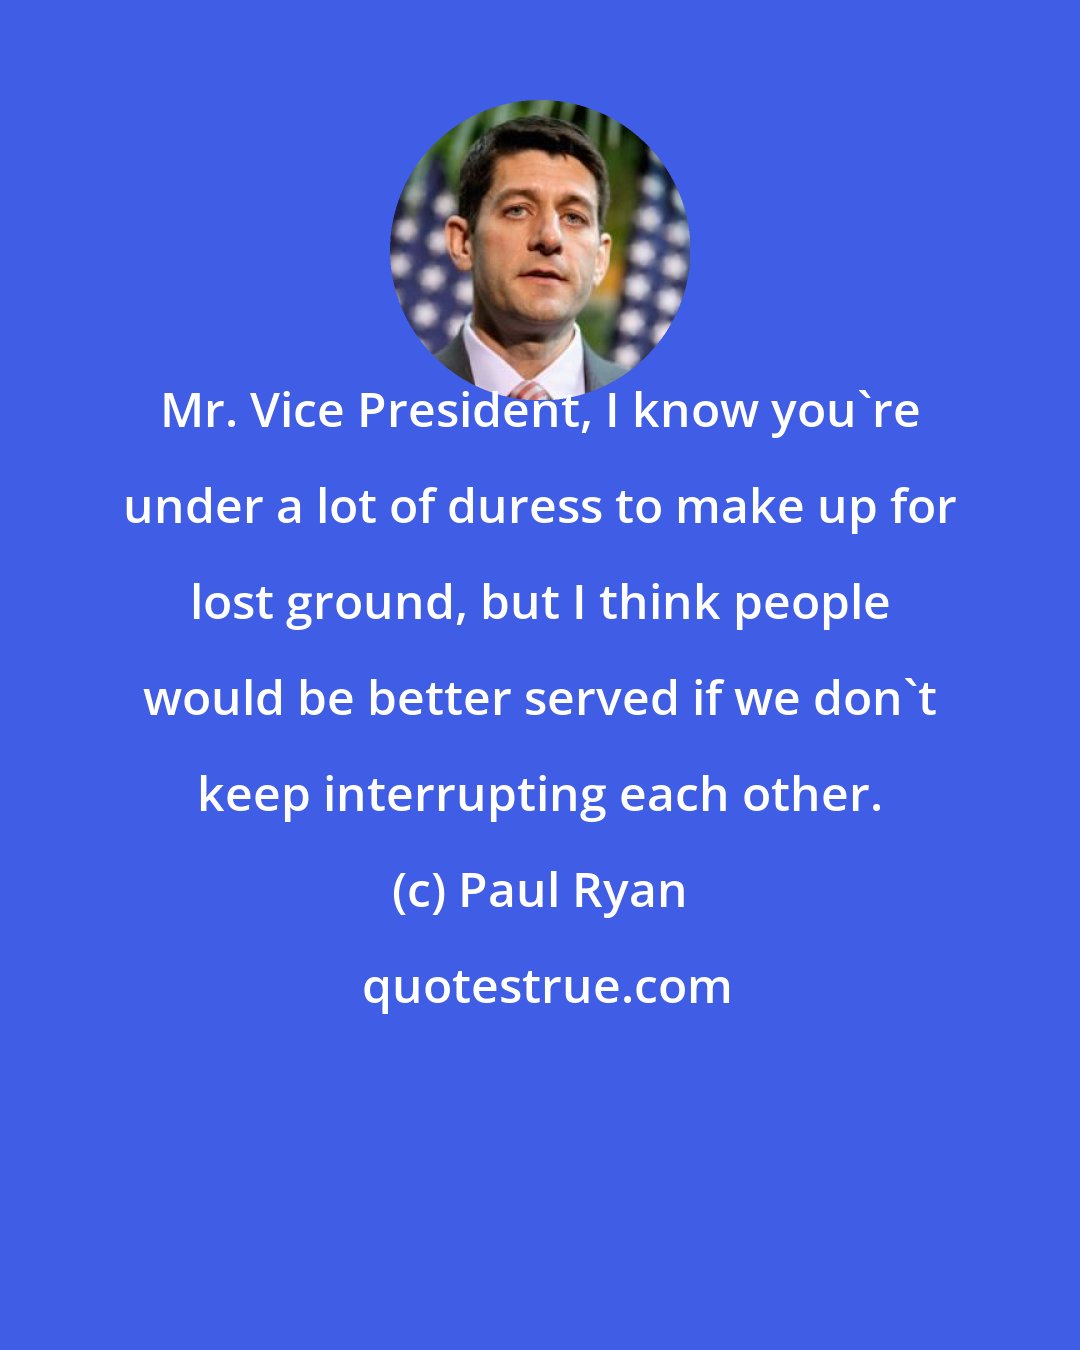 Paul Ryan: Mr. Vice President, I know you're under a lot of duress to make up for lost ground, but I think people would be better served if we don't keep interrupting each other.